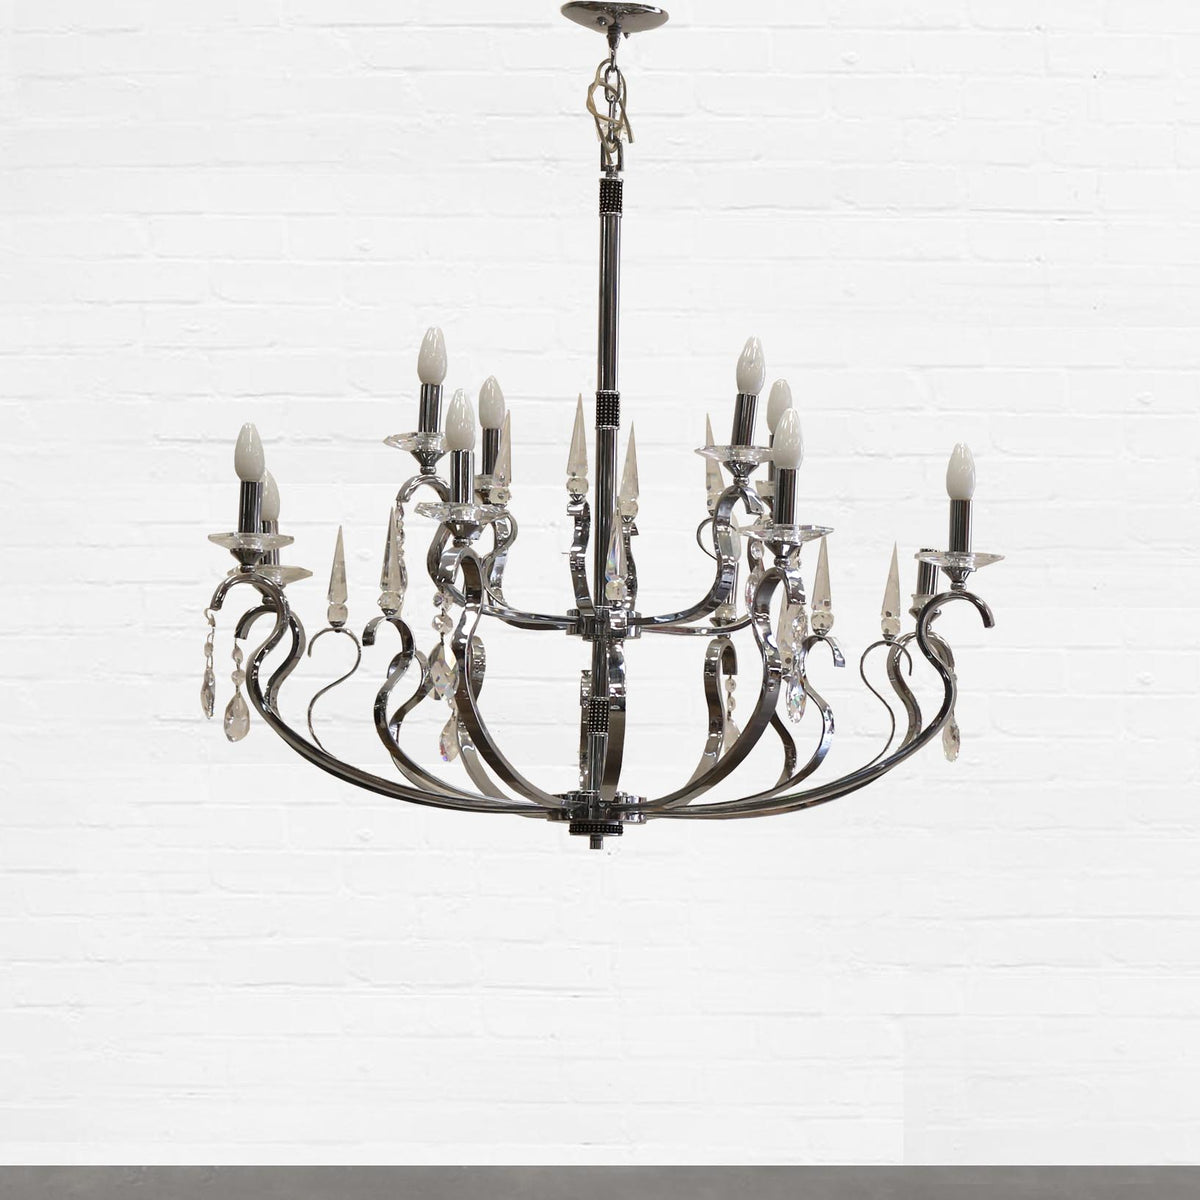 Chrome and Cut Glass Chandelier | The Architectural Forum